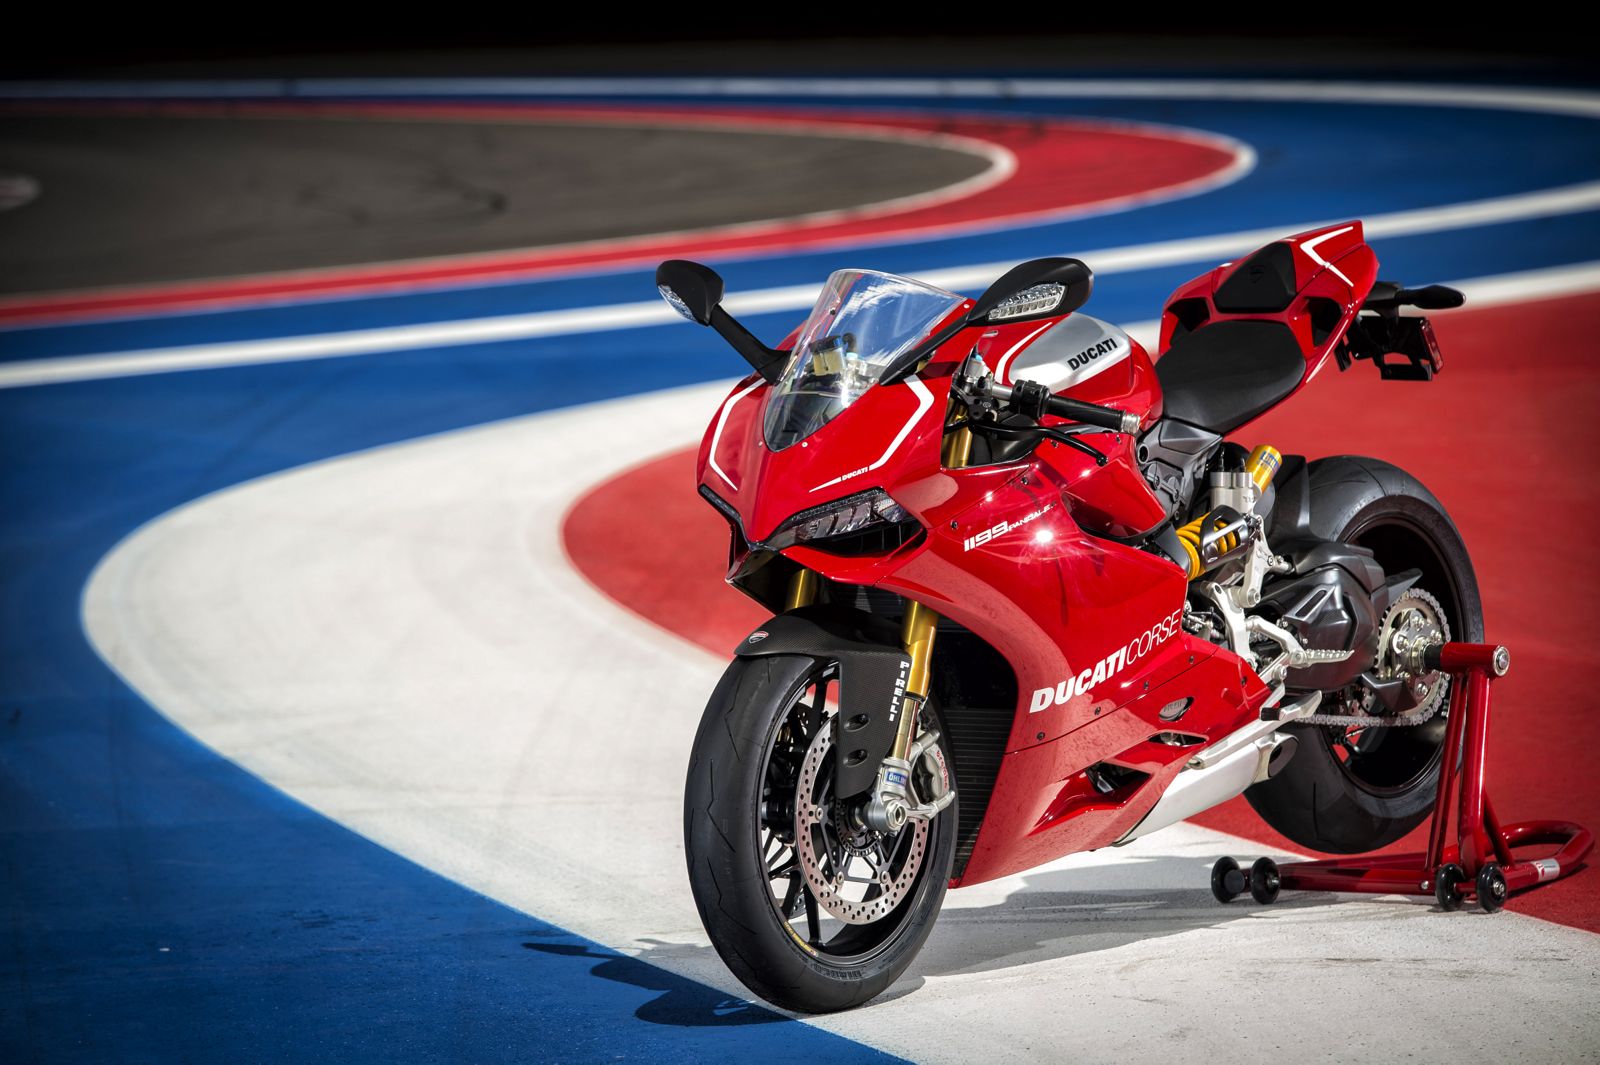 2013-ducati-1199-panigale-r-official-pictures-photo-gallery_13.jpg